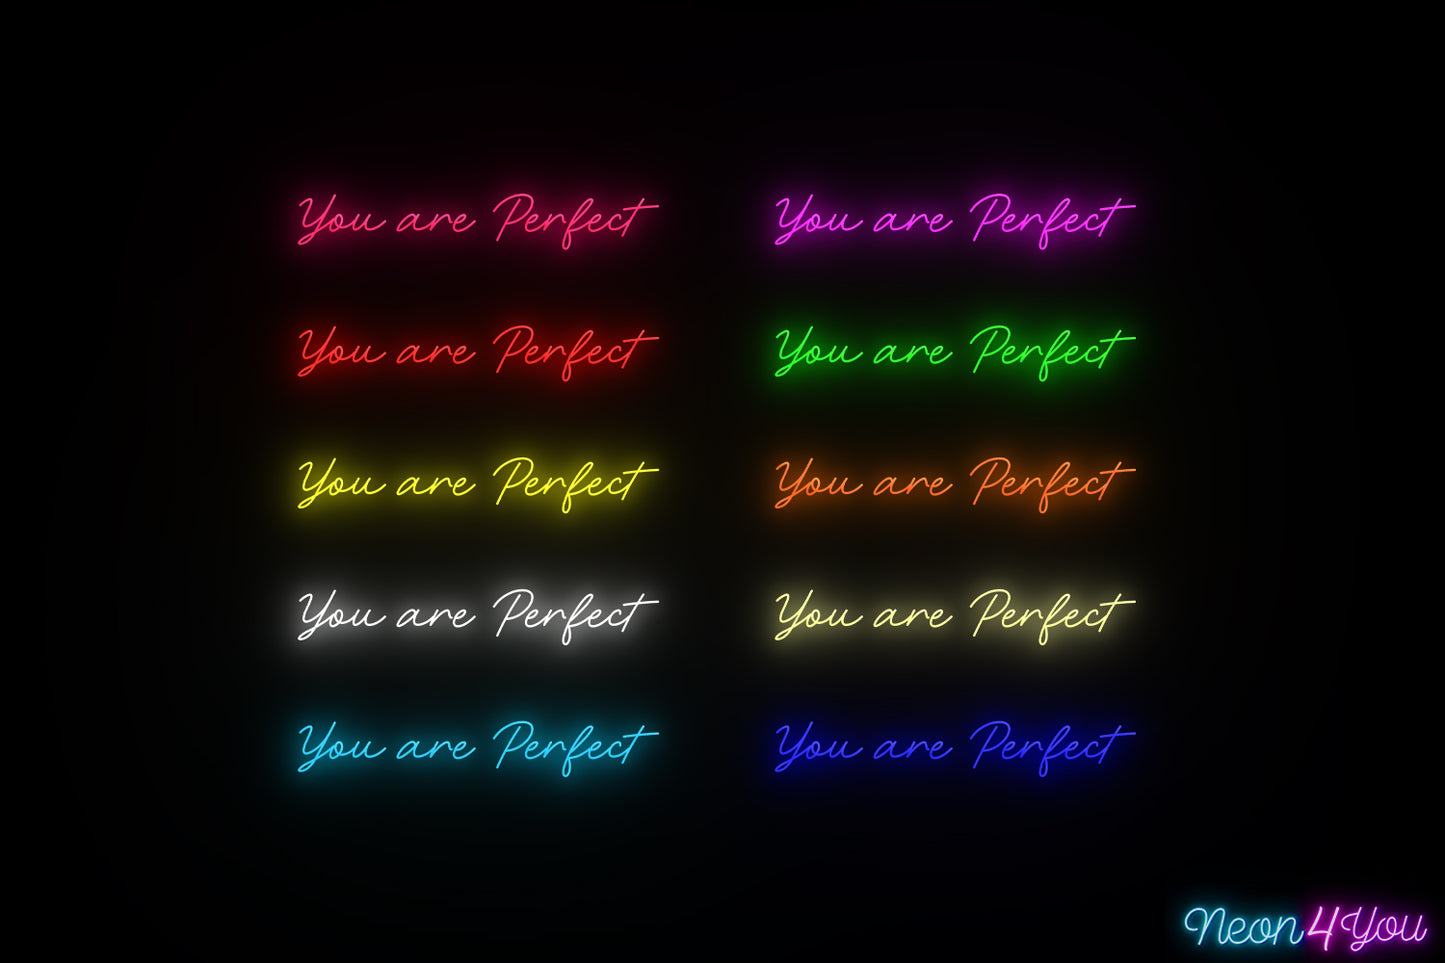 You are Perfect